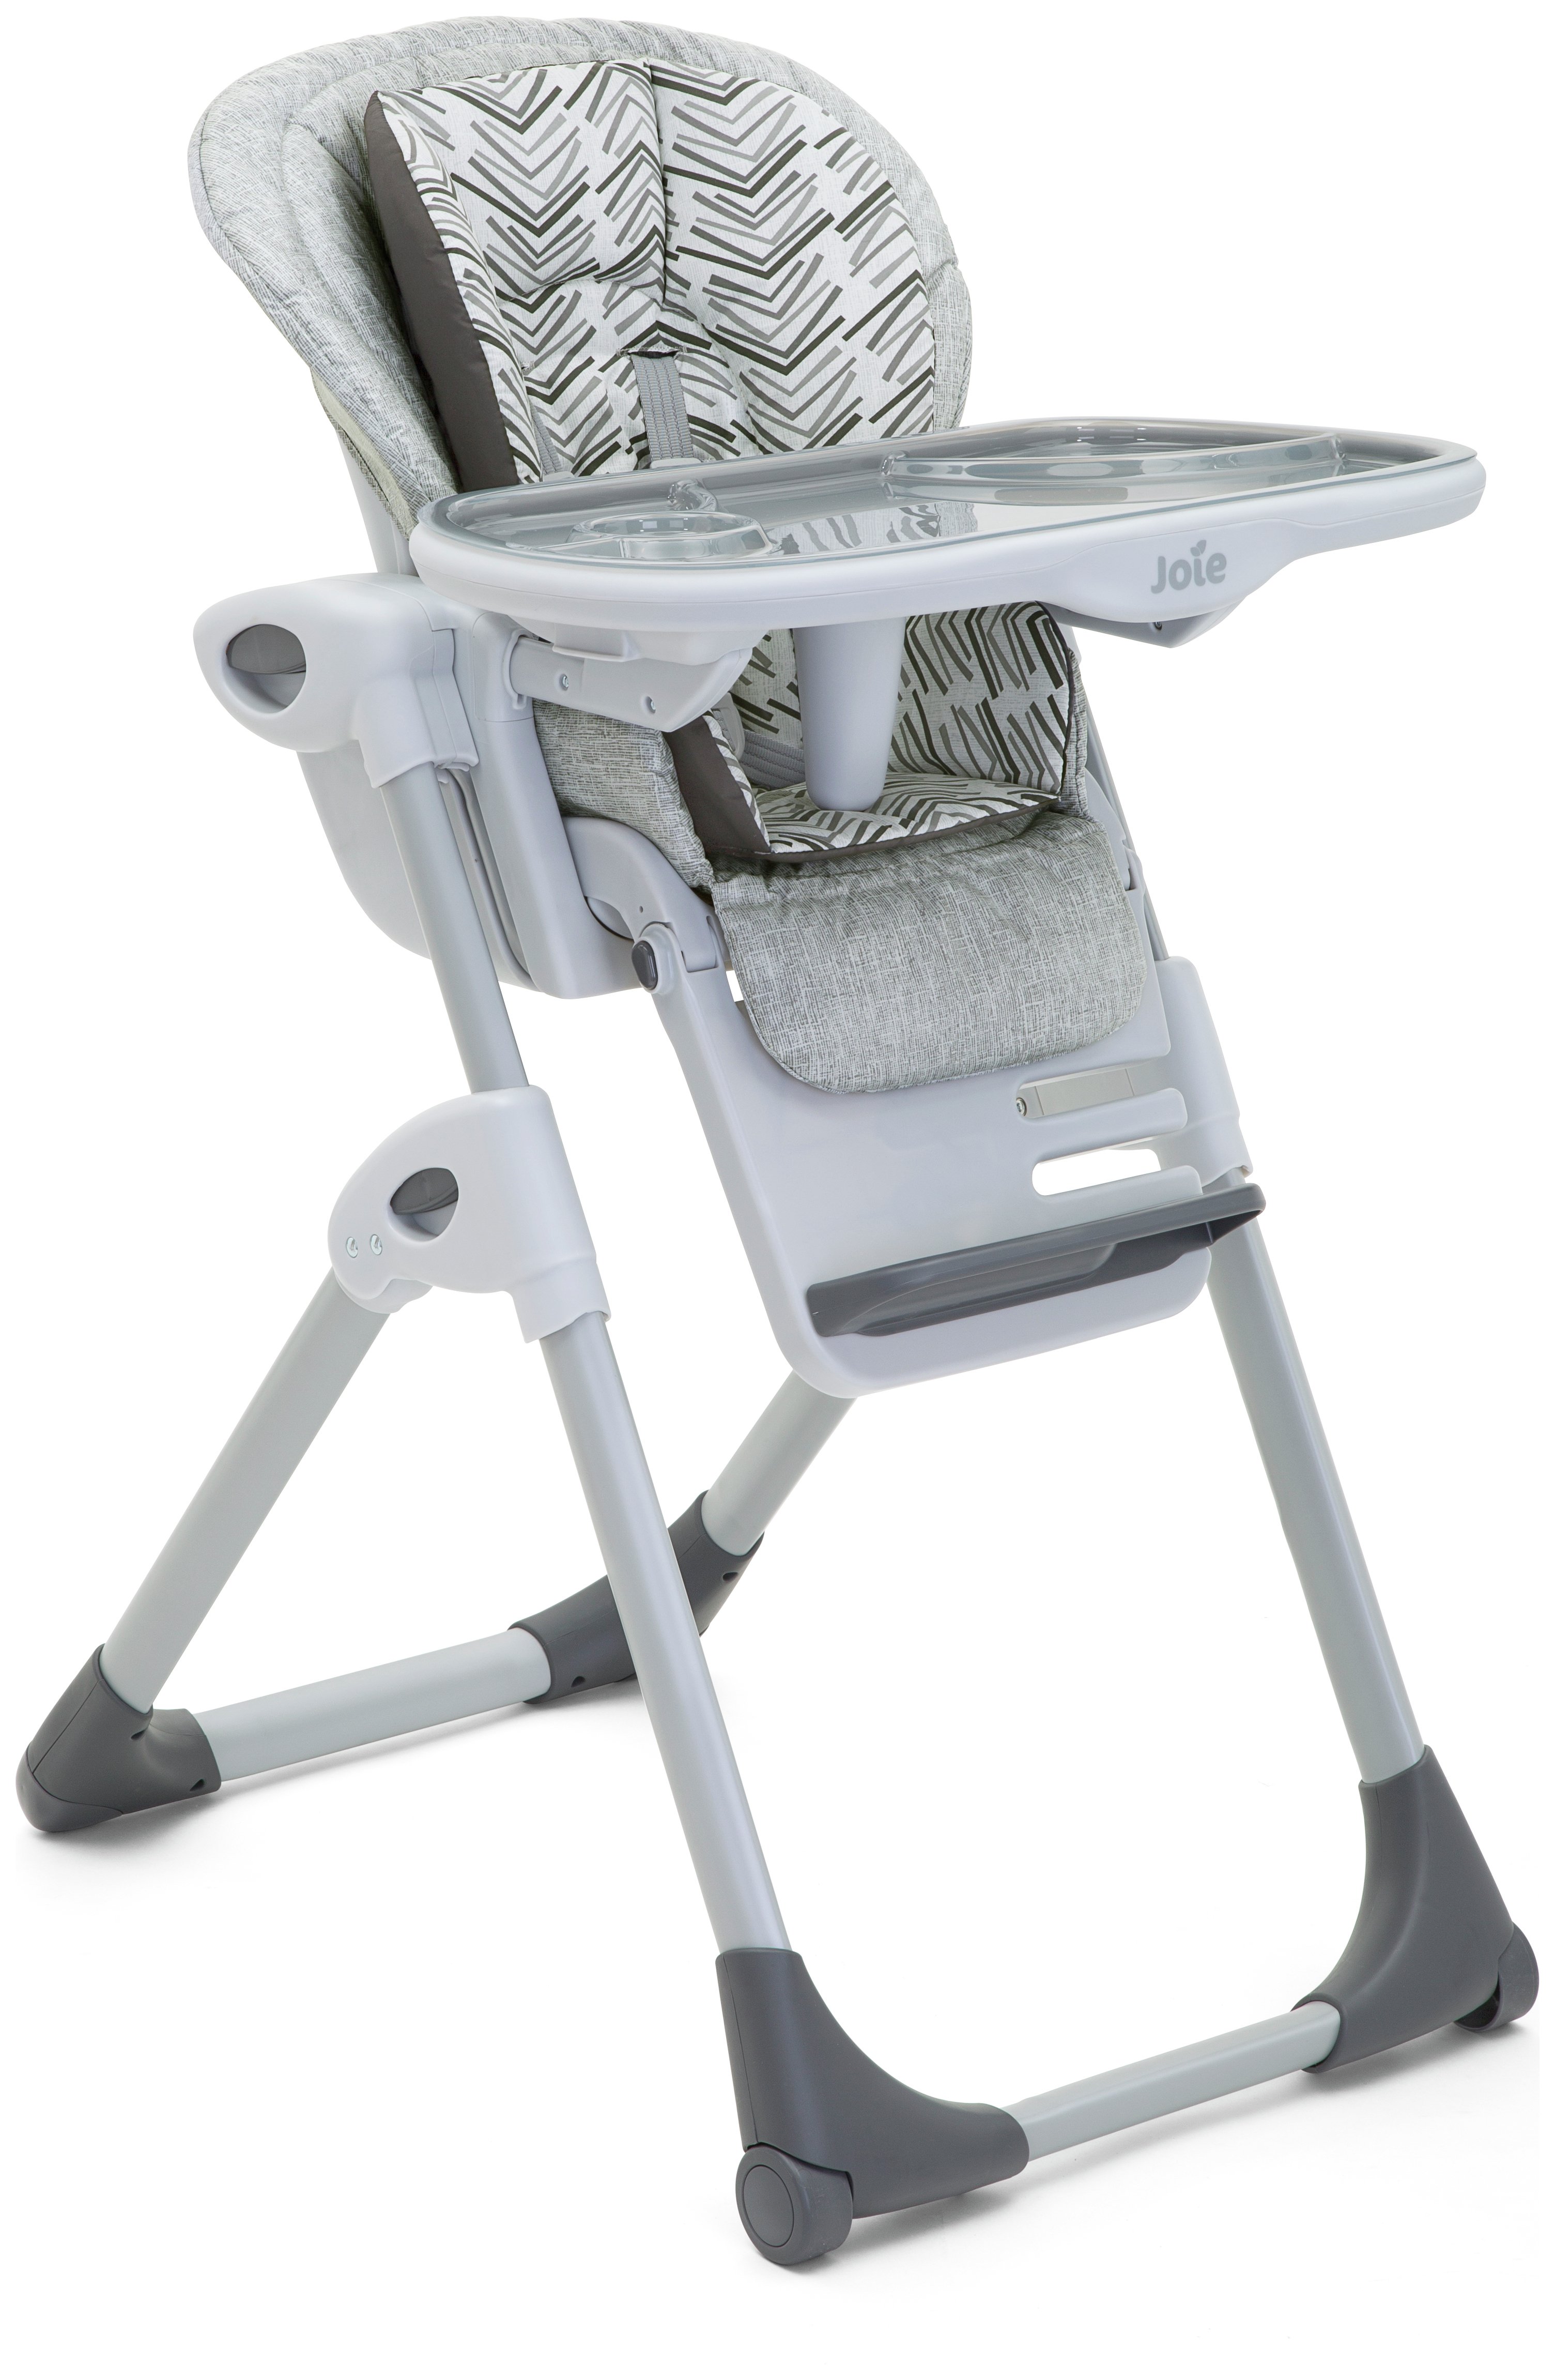 Joie Mimzy LX Highchair - Abstract Arrows.